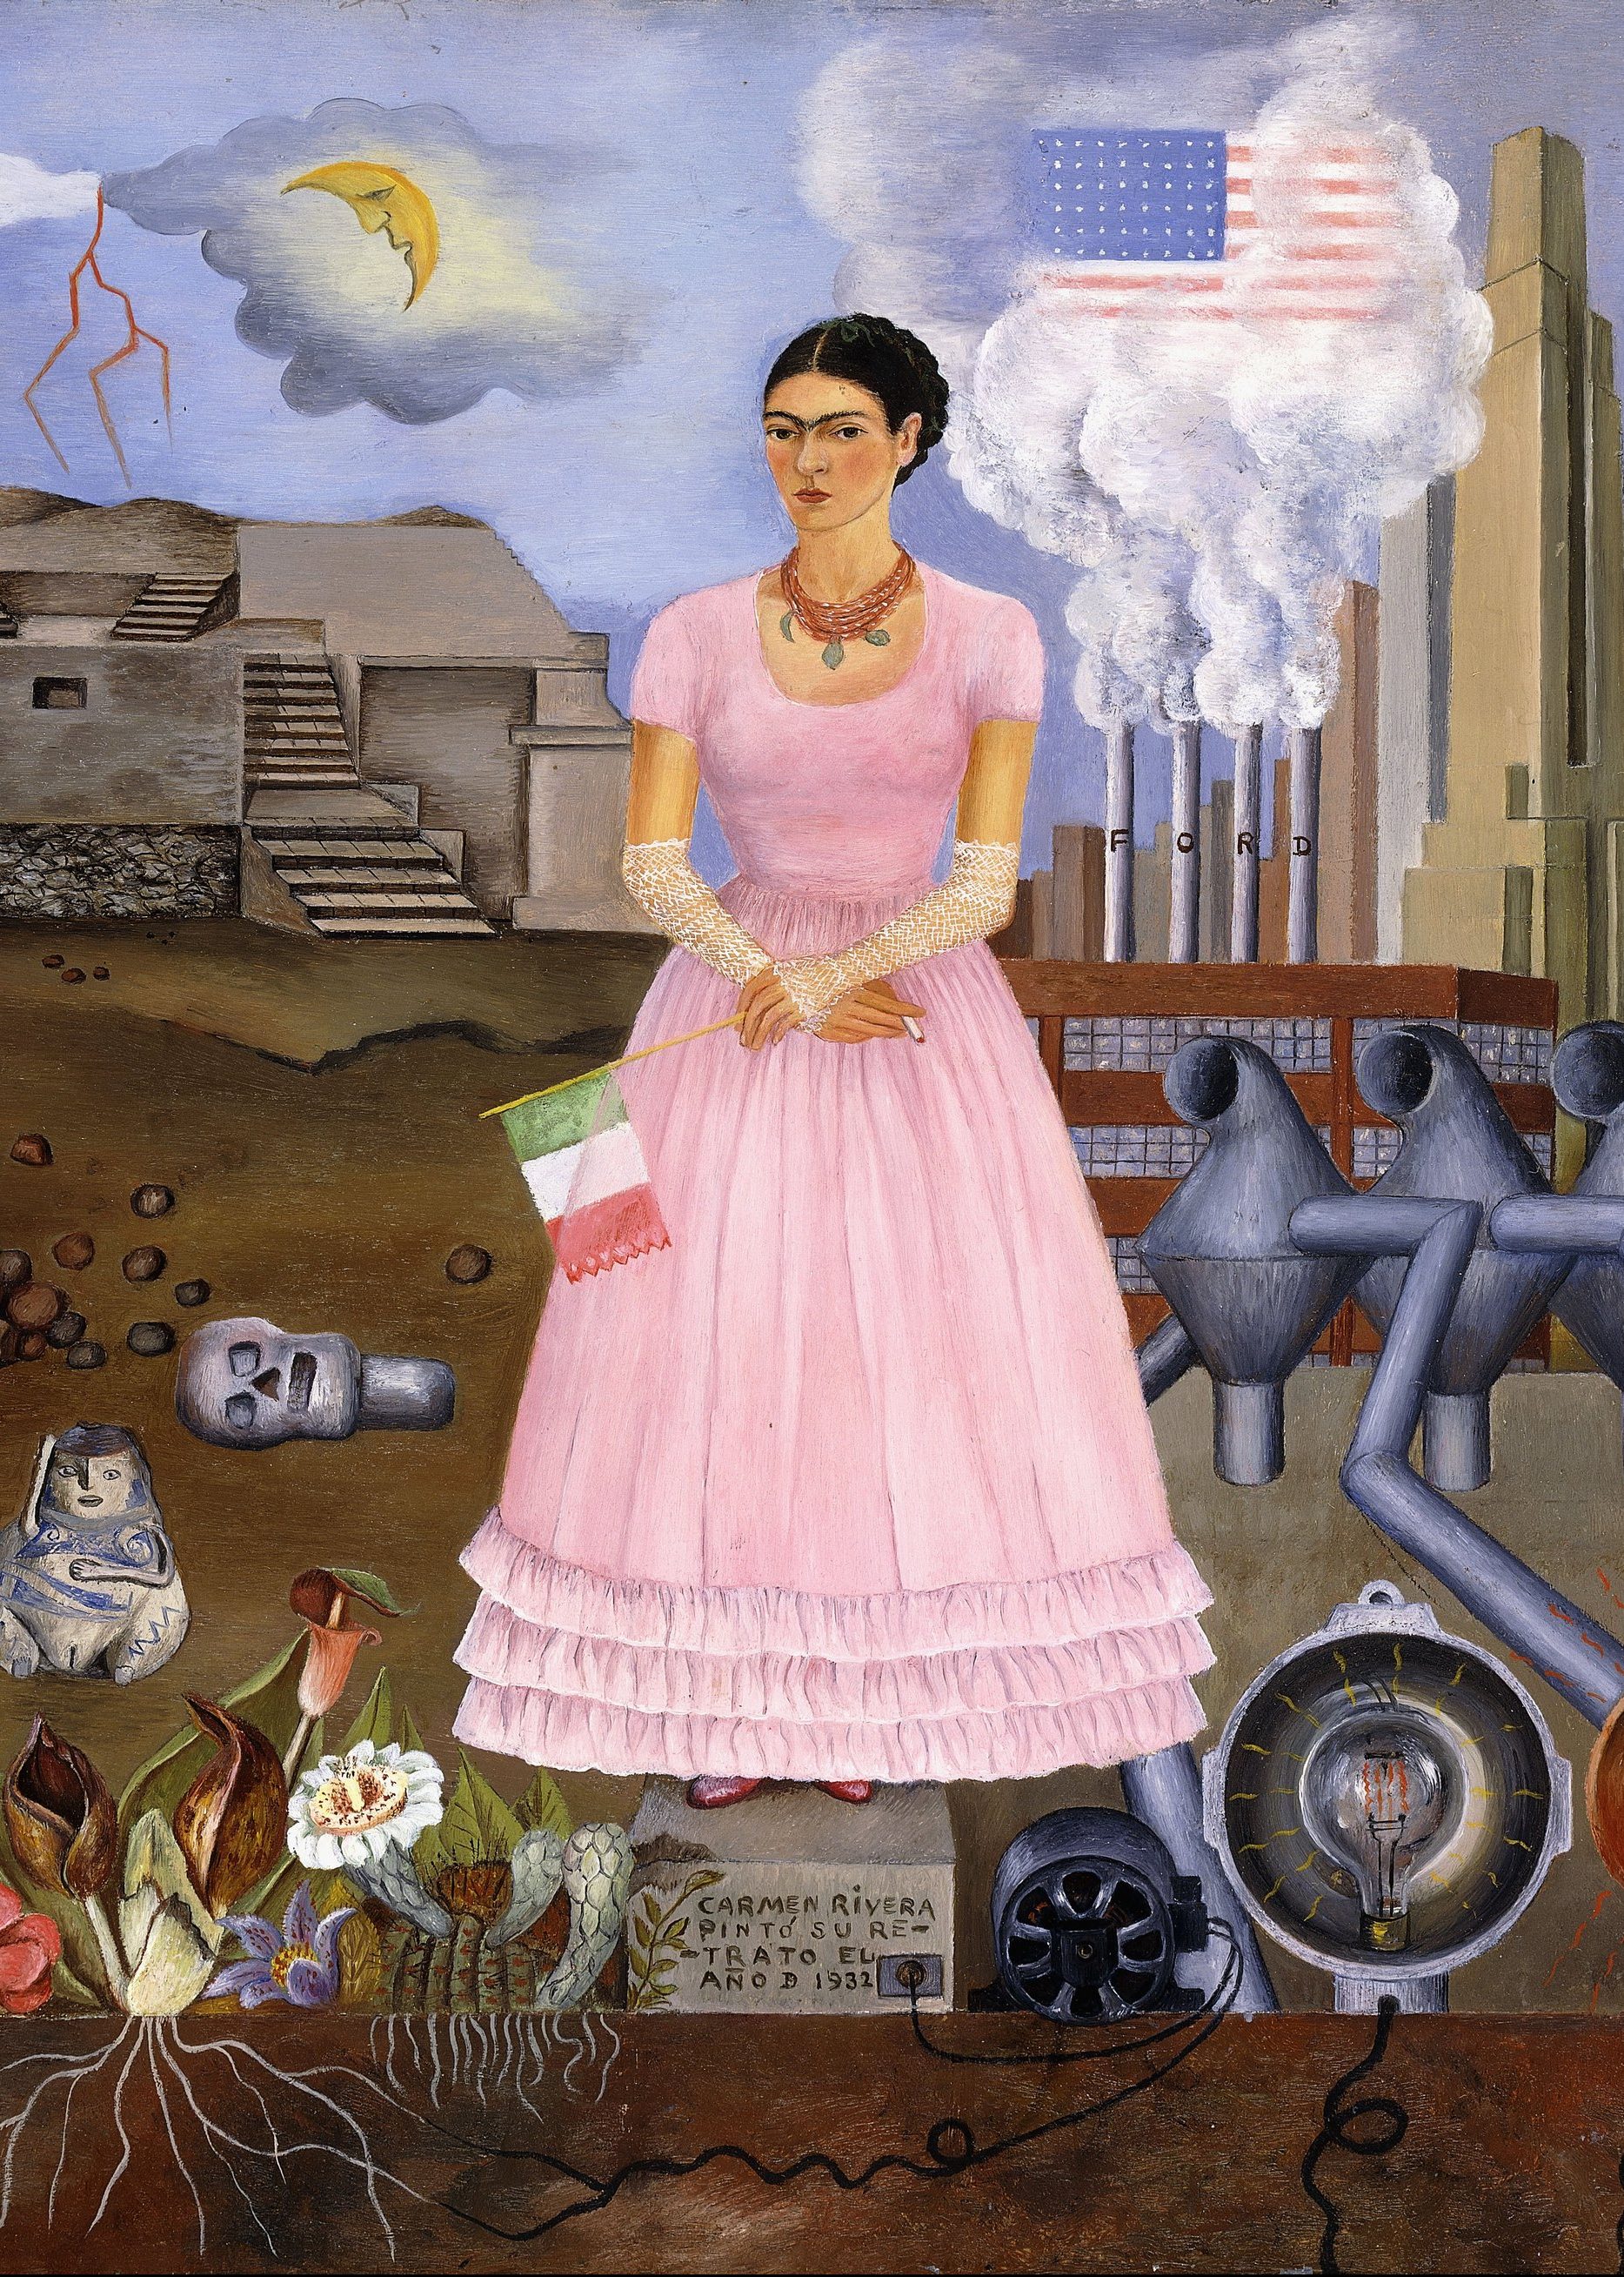 Self-Portrait on the Border Line Between Mexico and the United States, 1932, by Frida Kahlo (Banco de México Diego Rivera Frida Kahlo Museums Trust, Mexico, D.F./Artists Rights Society (ARS), New York)